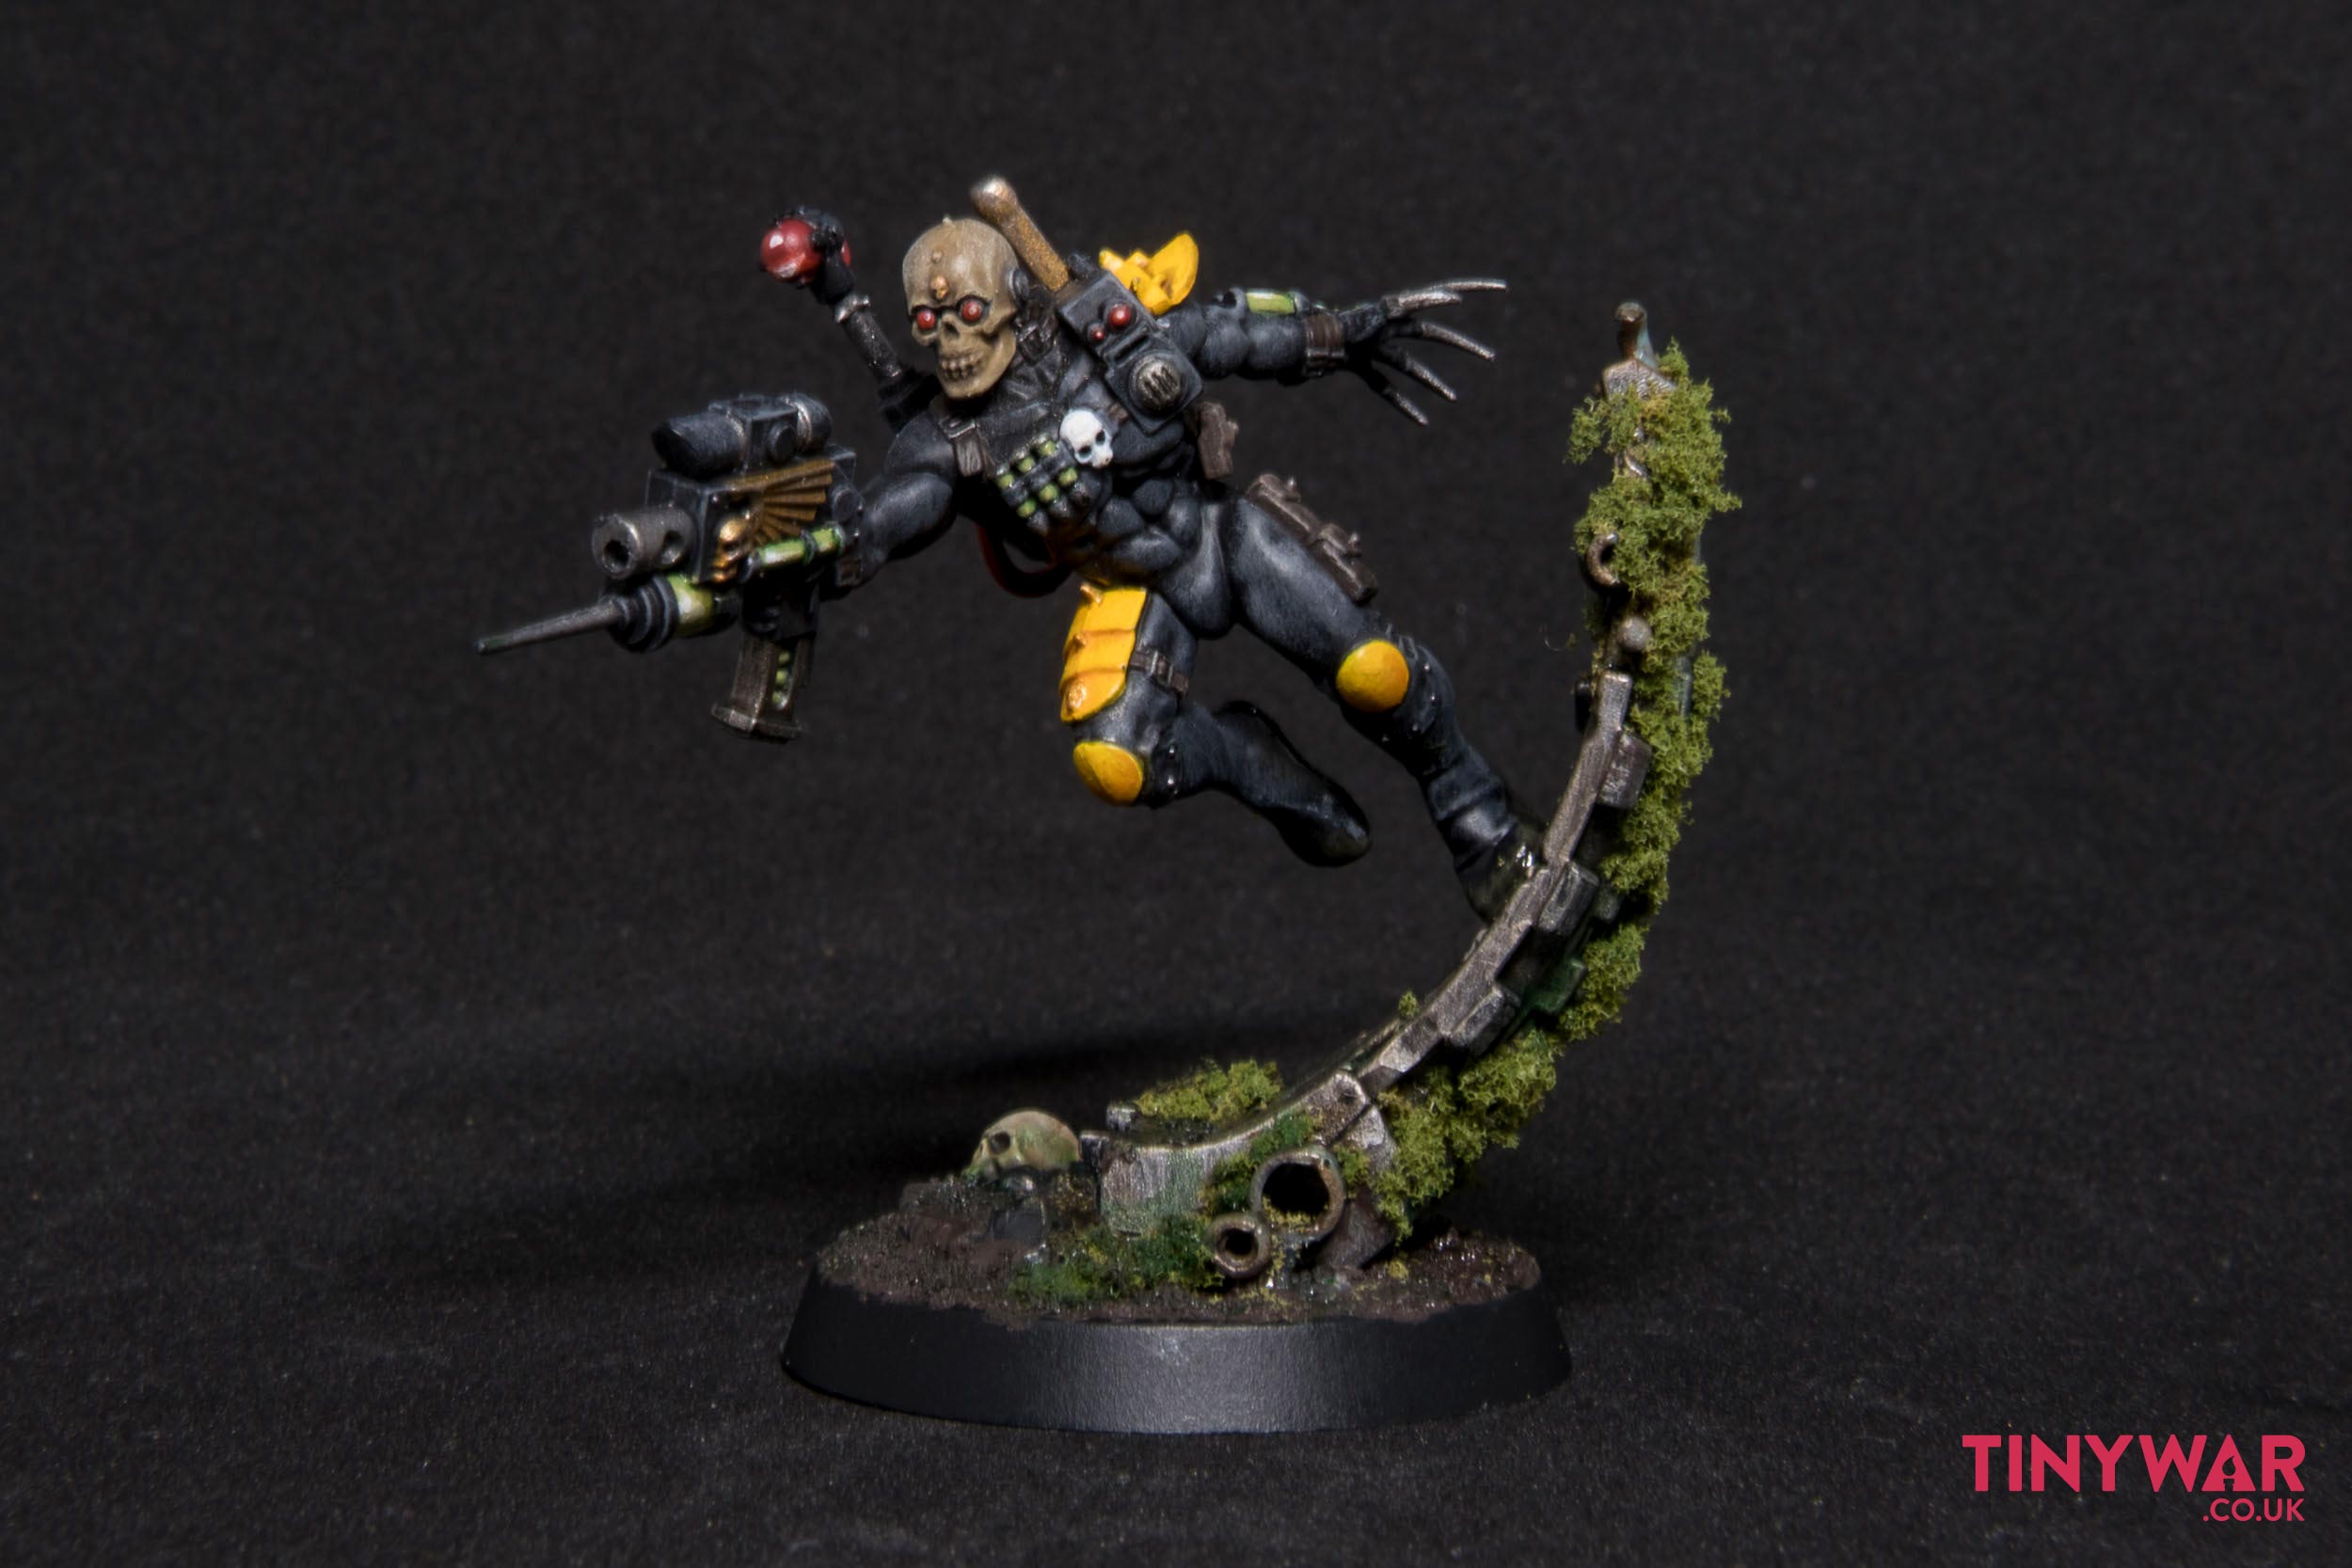 Warhammer 40,000 Eversor Assassin commission painted.